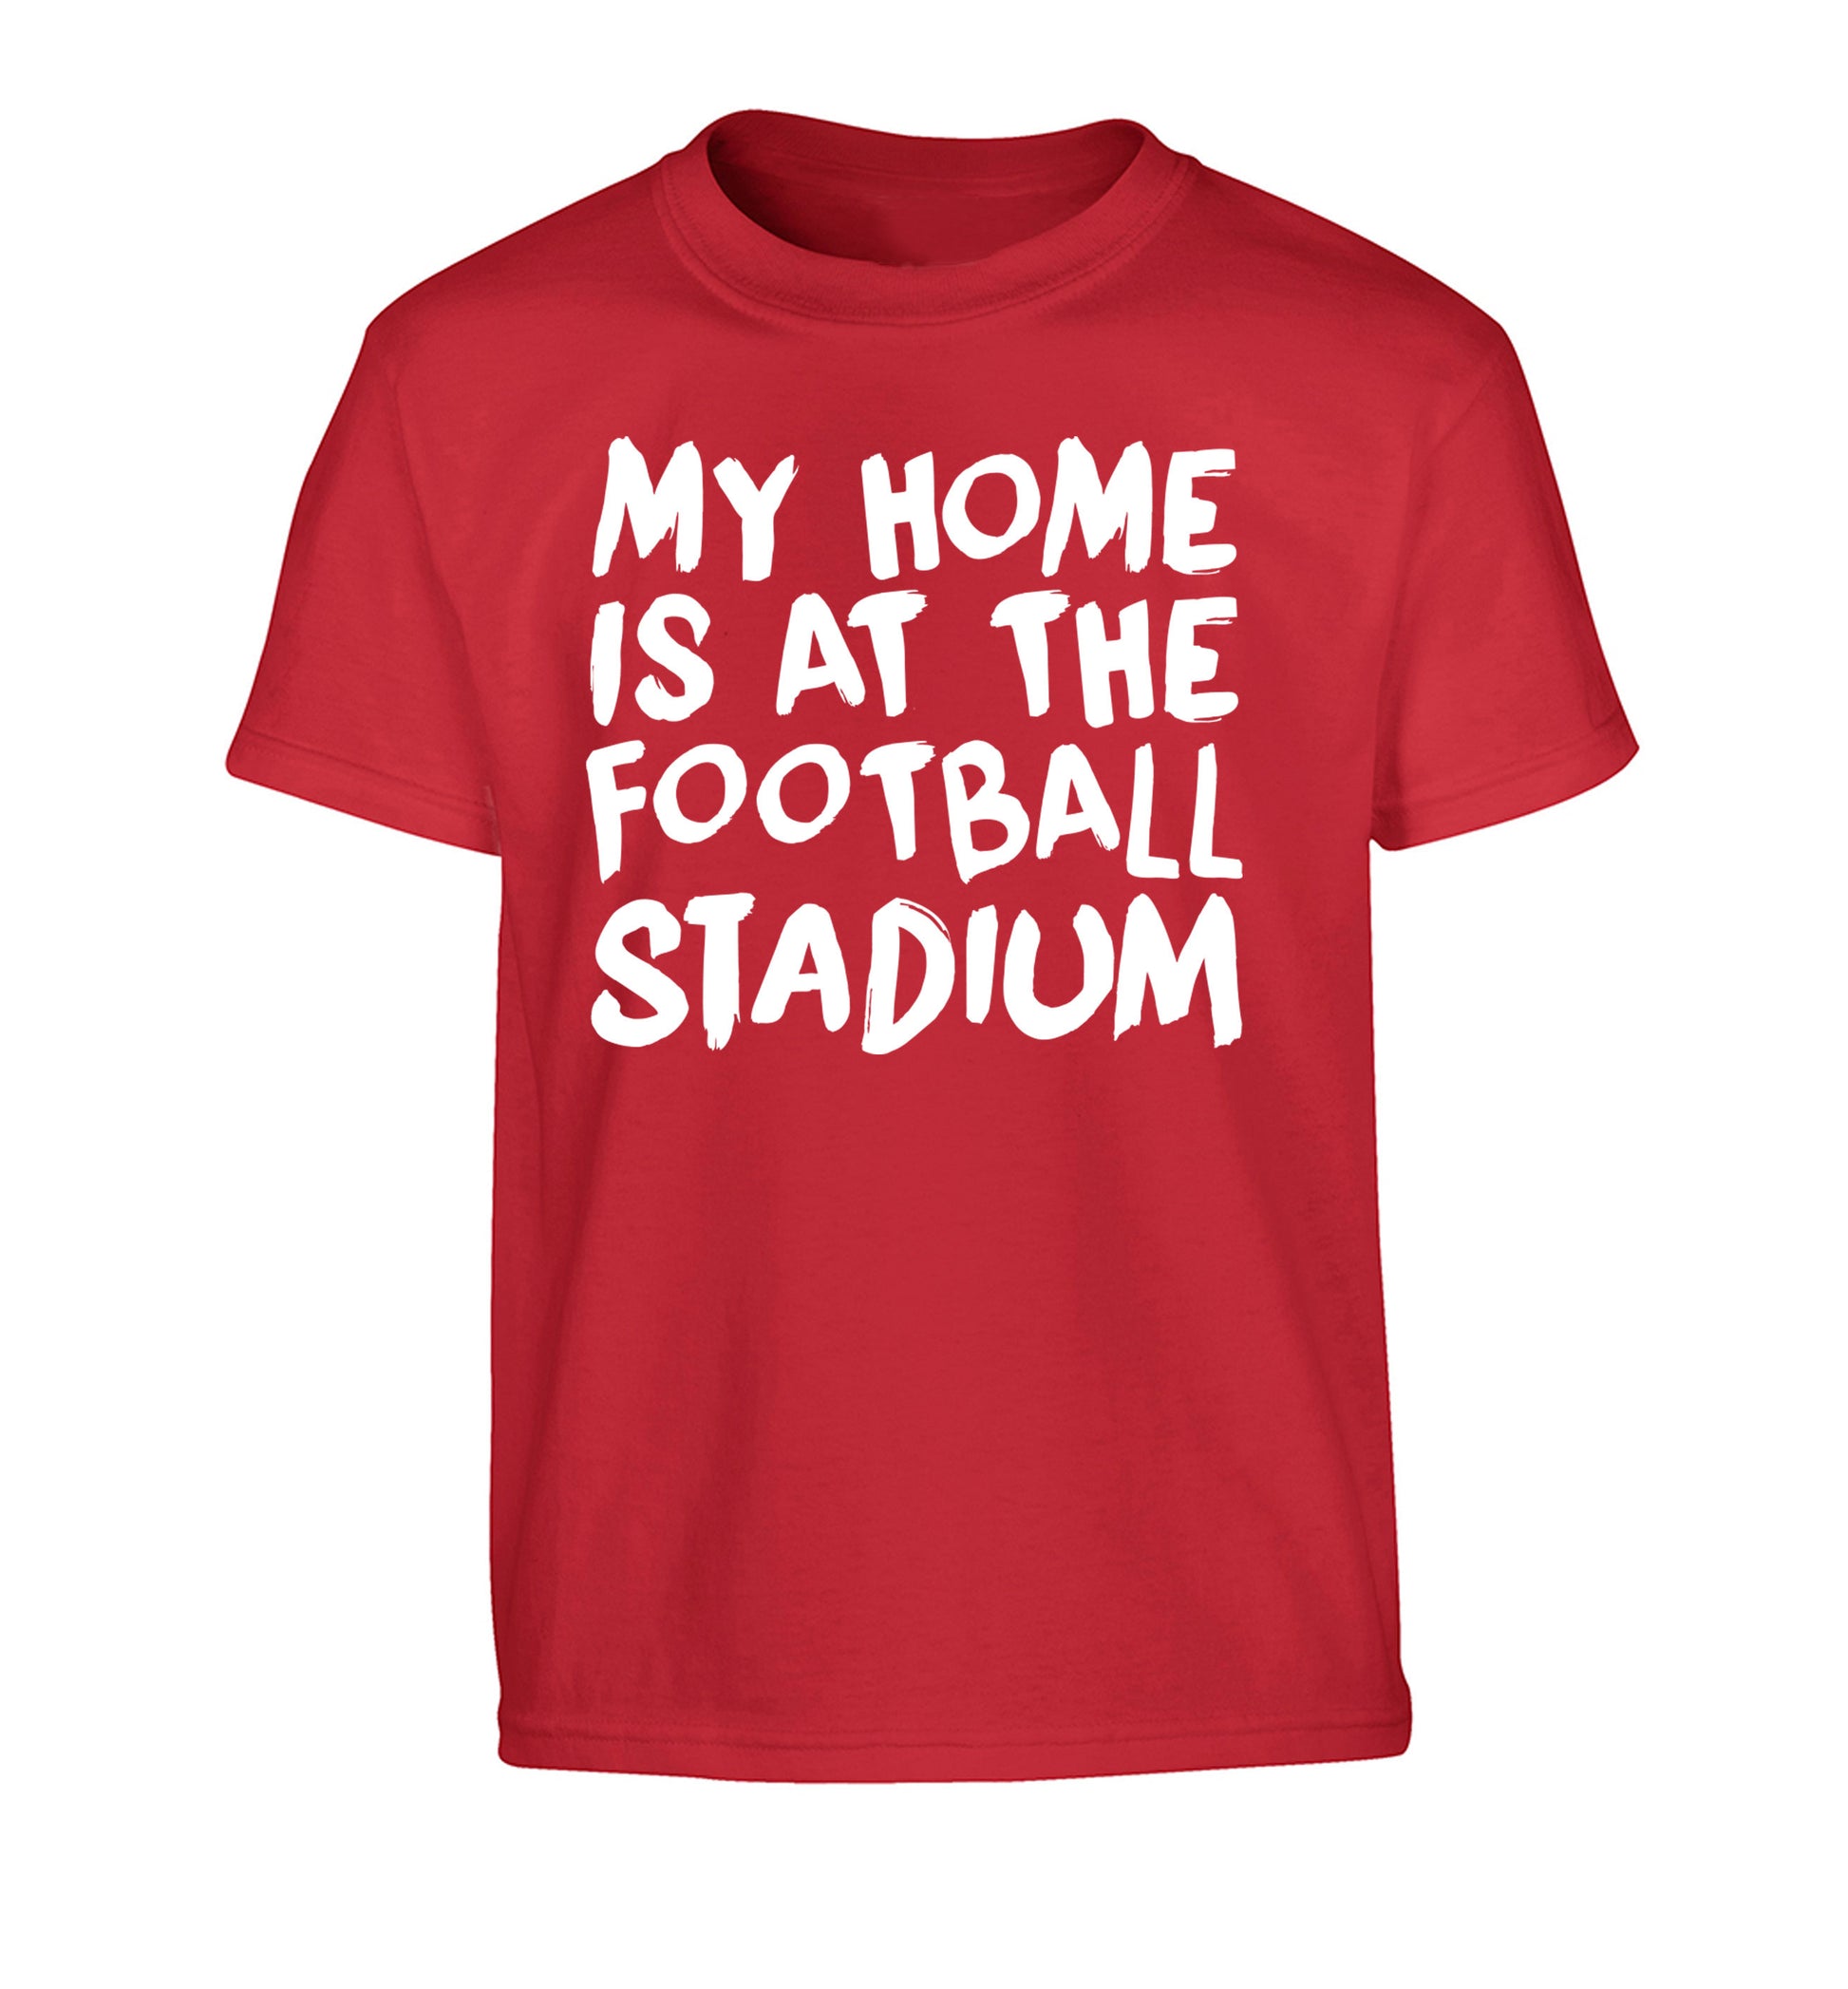 My home is at the football stadium Children's red Tshirt 12-14 Years